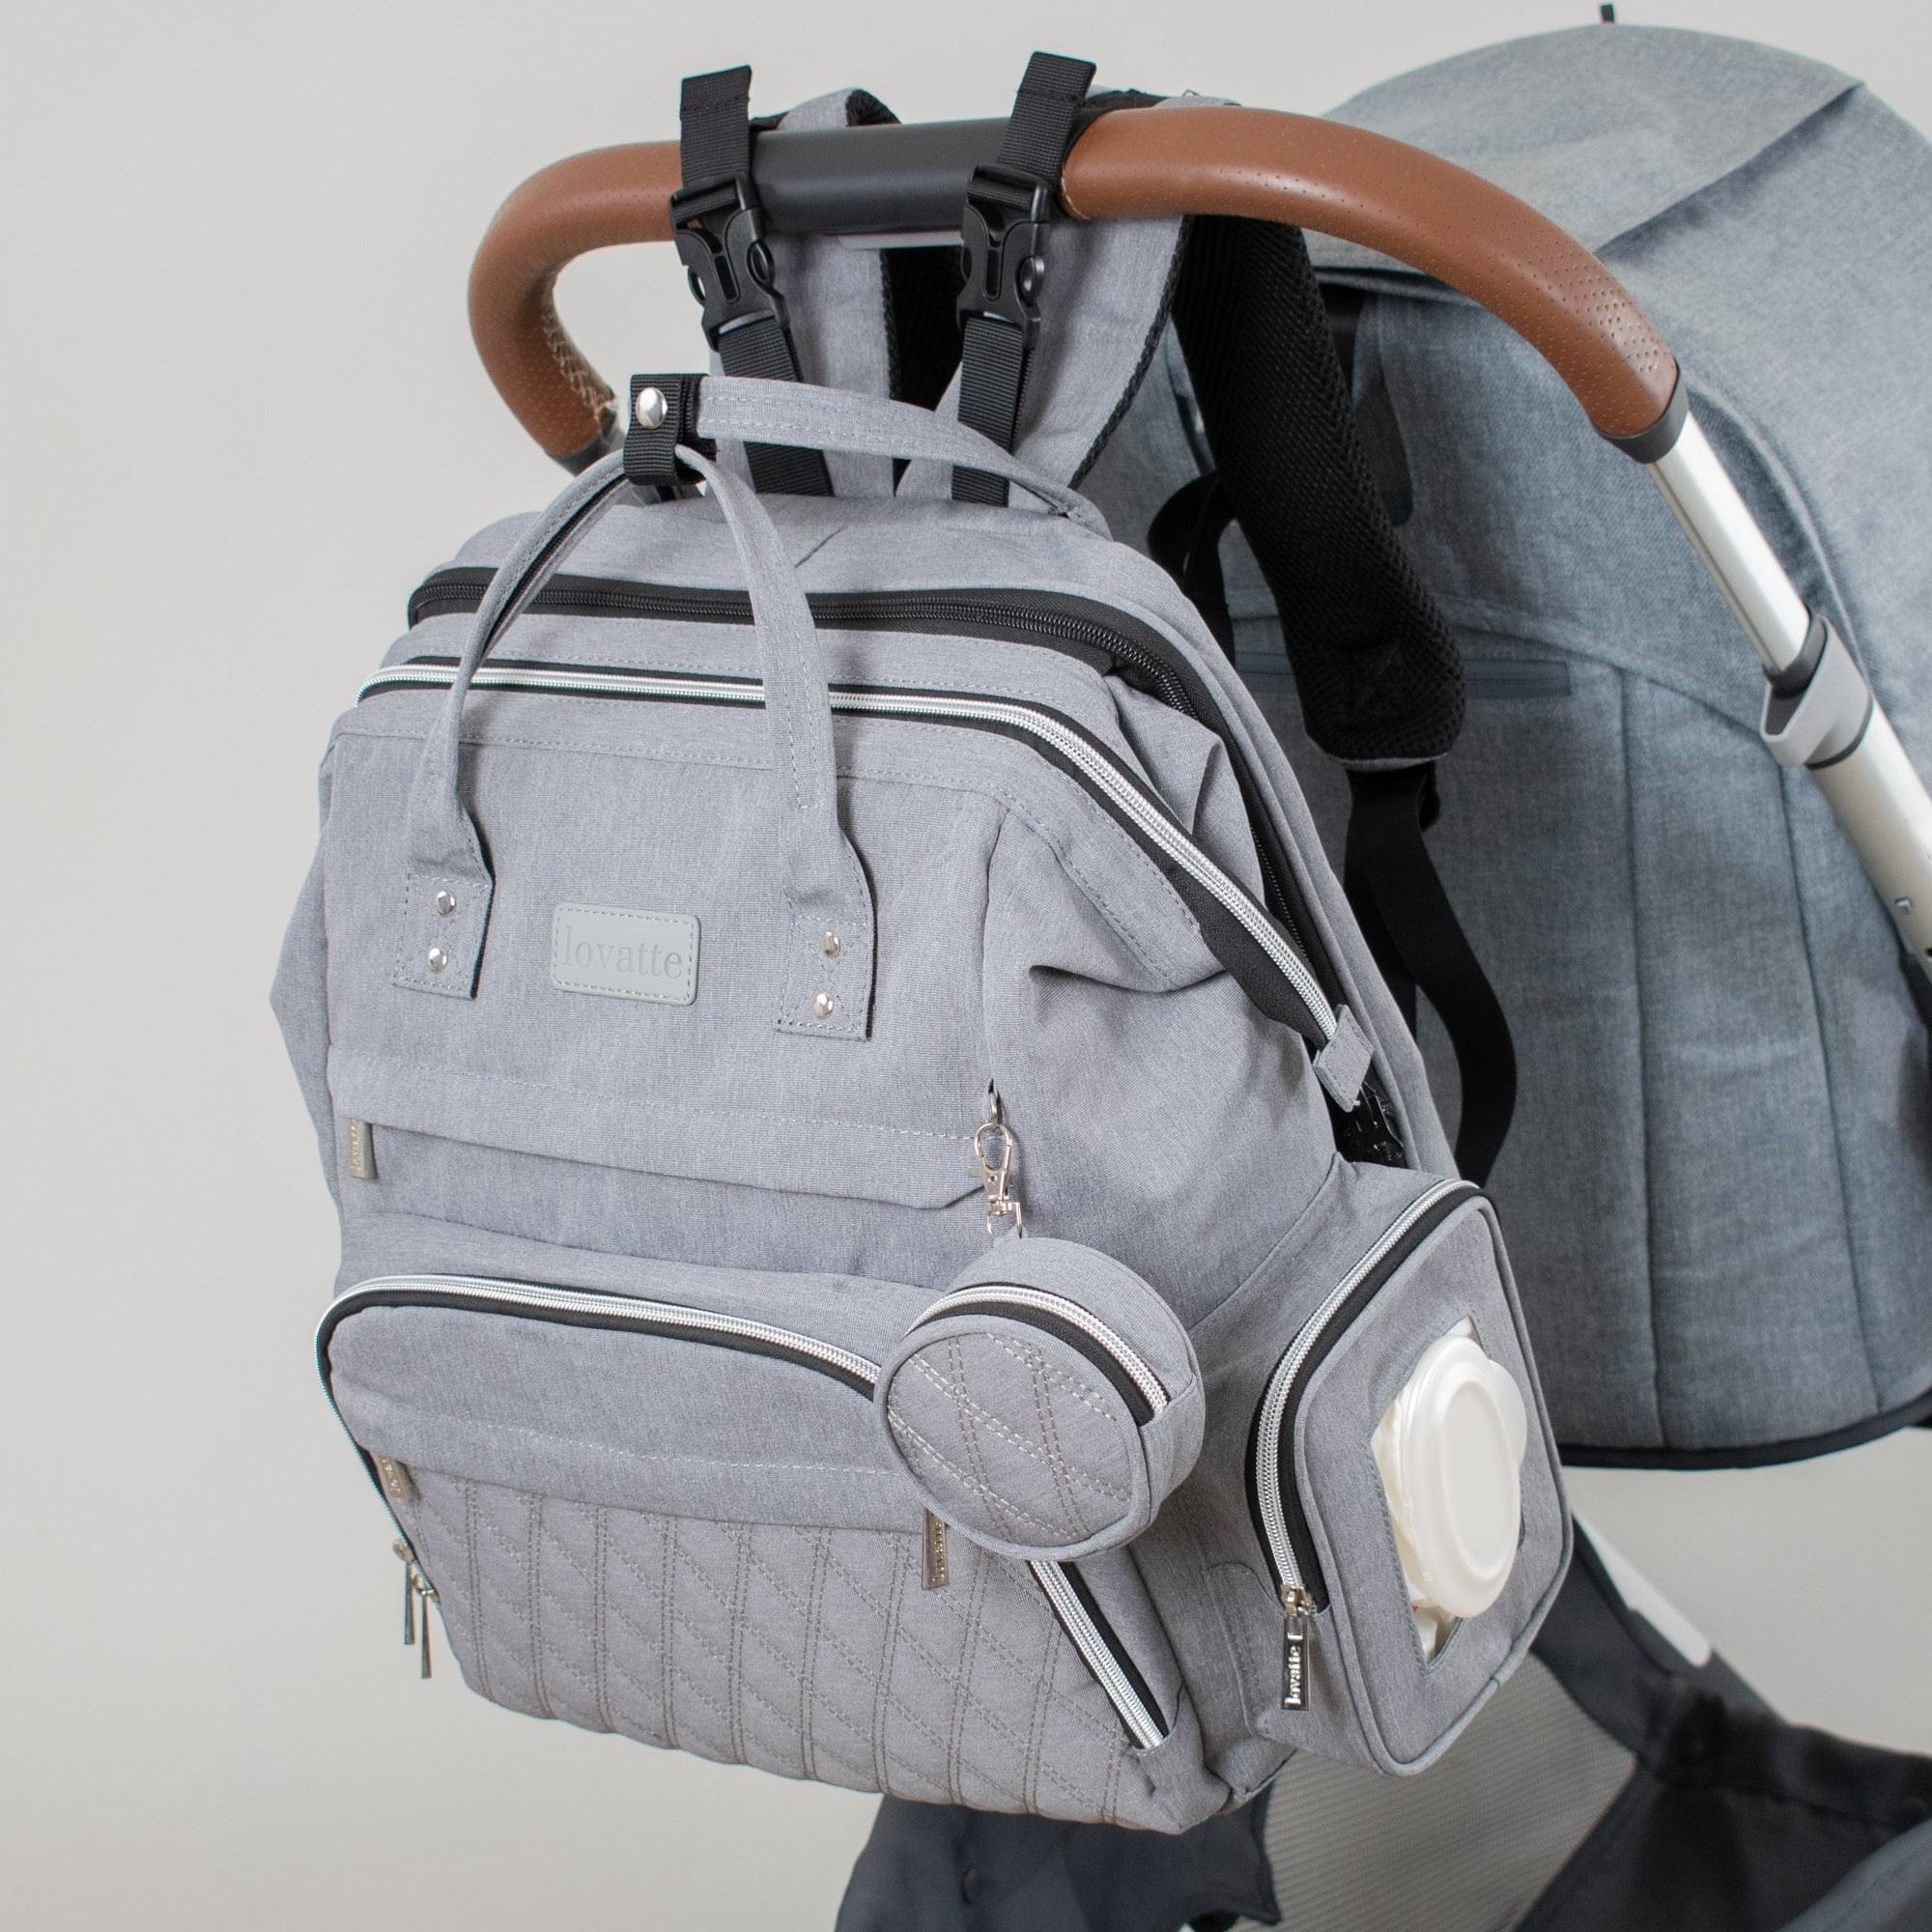 Diaper Bags That Merge Fashion And Functionality